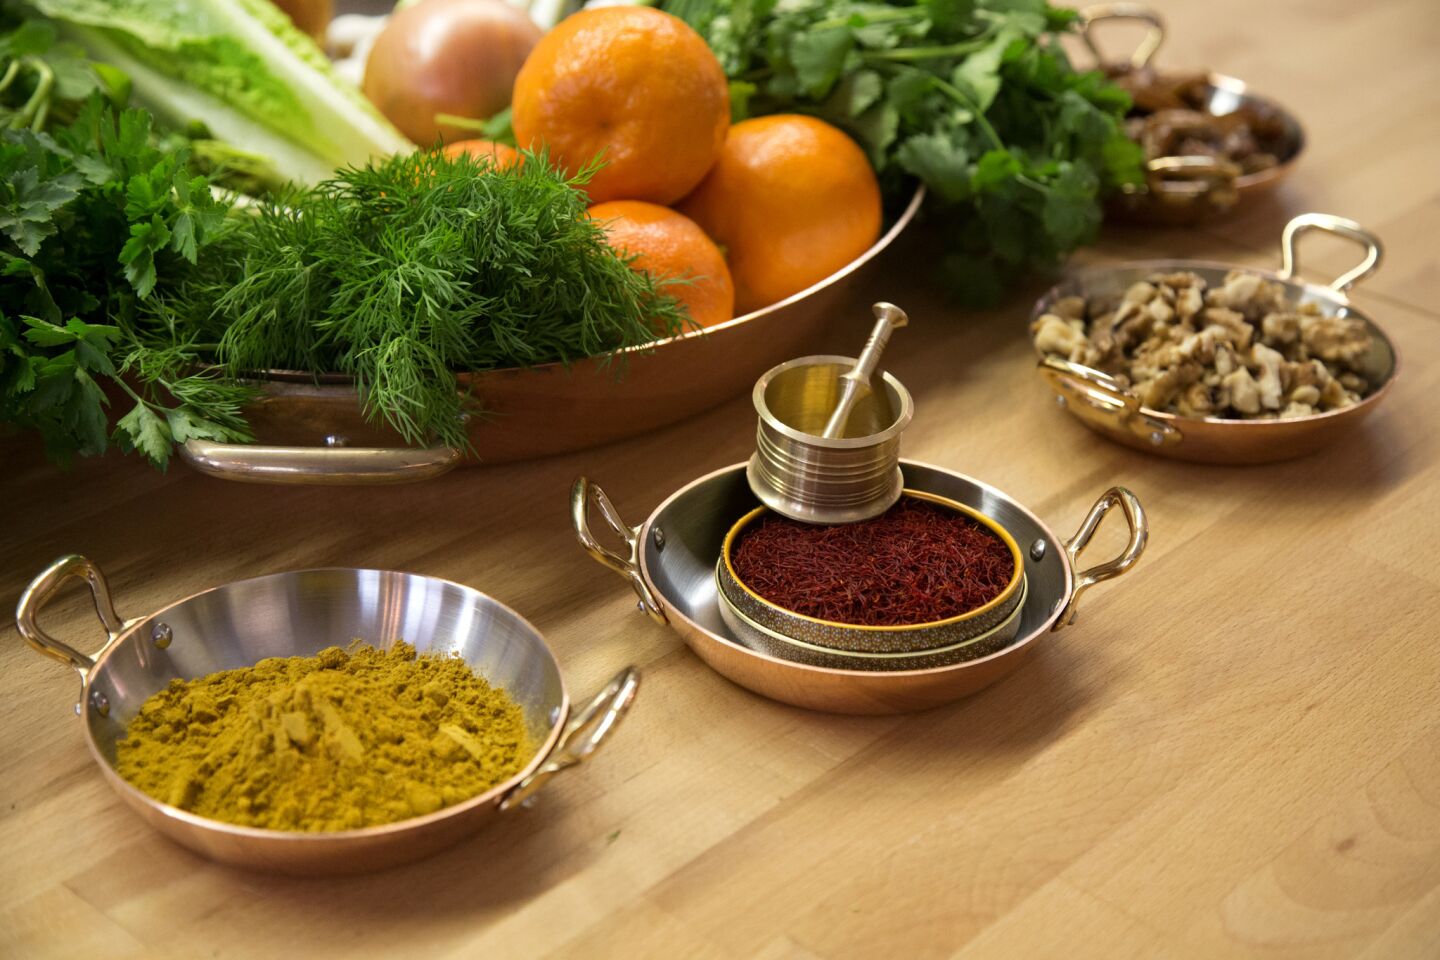 A selection of herbs and other ingredients, including a Persian spice blend and saffron, will go into making dishes for the Persian New Year.